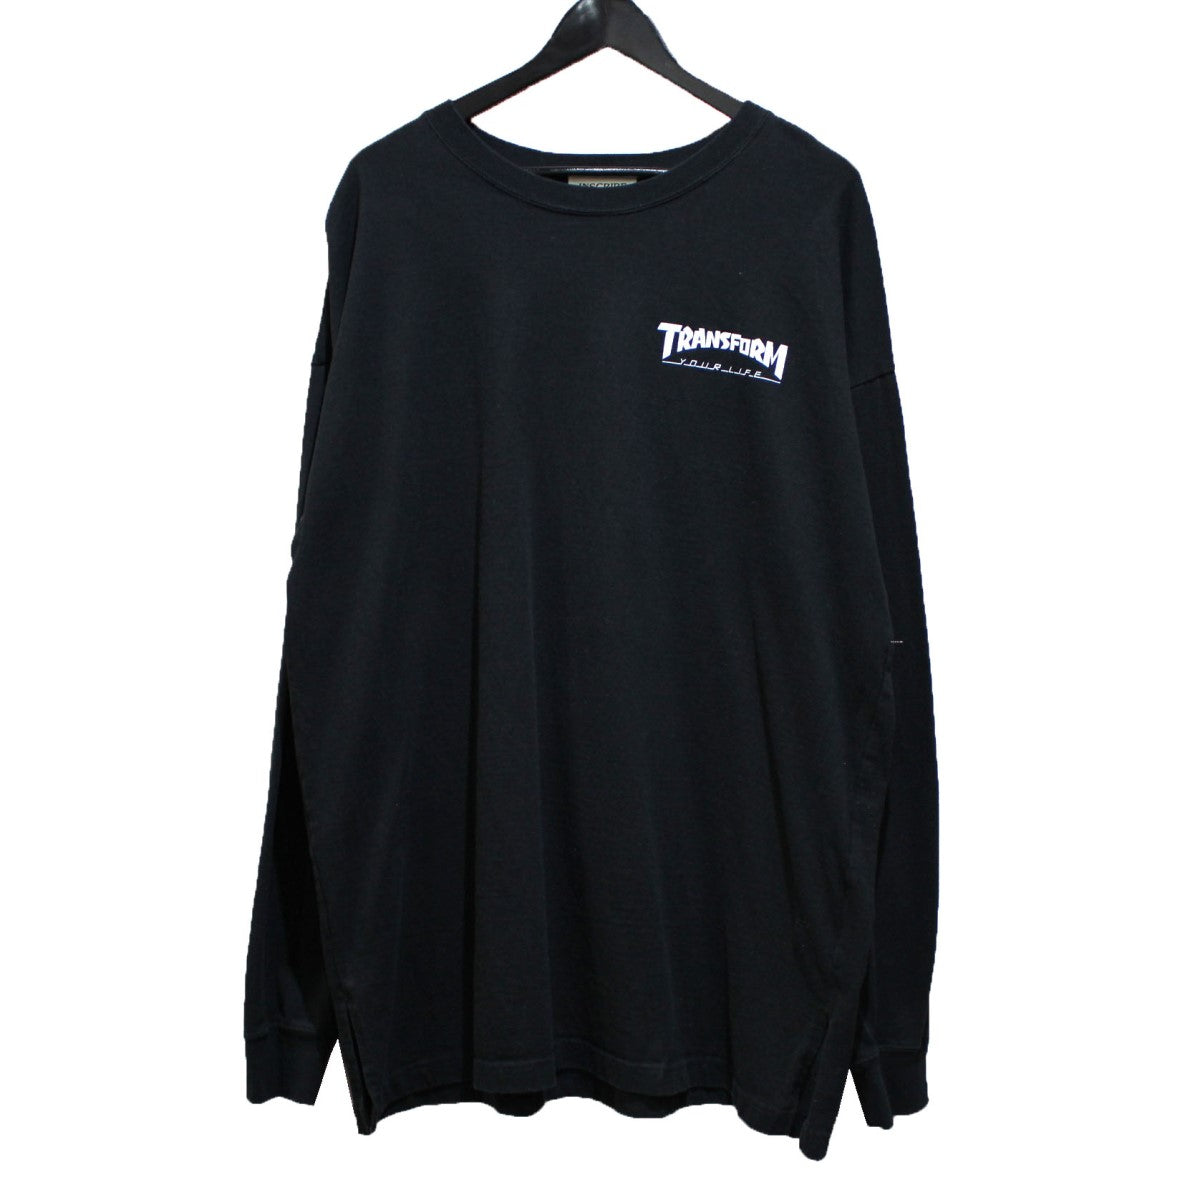 INSCRIRE(アンスクリア) 23AW Limited Long Sleeve Tee リミテッド ...